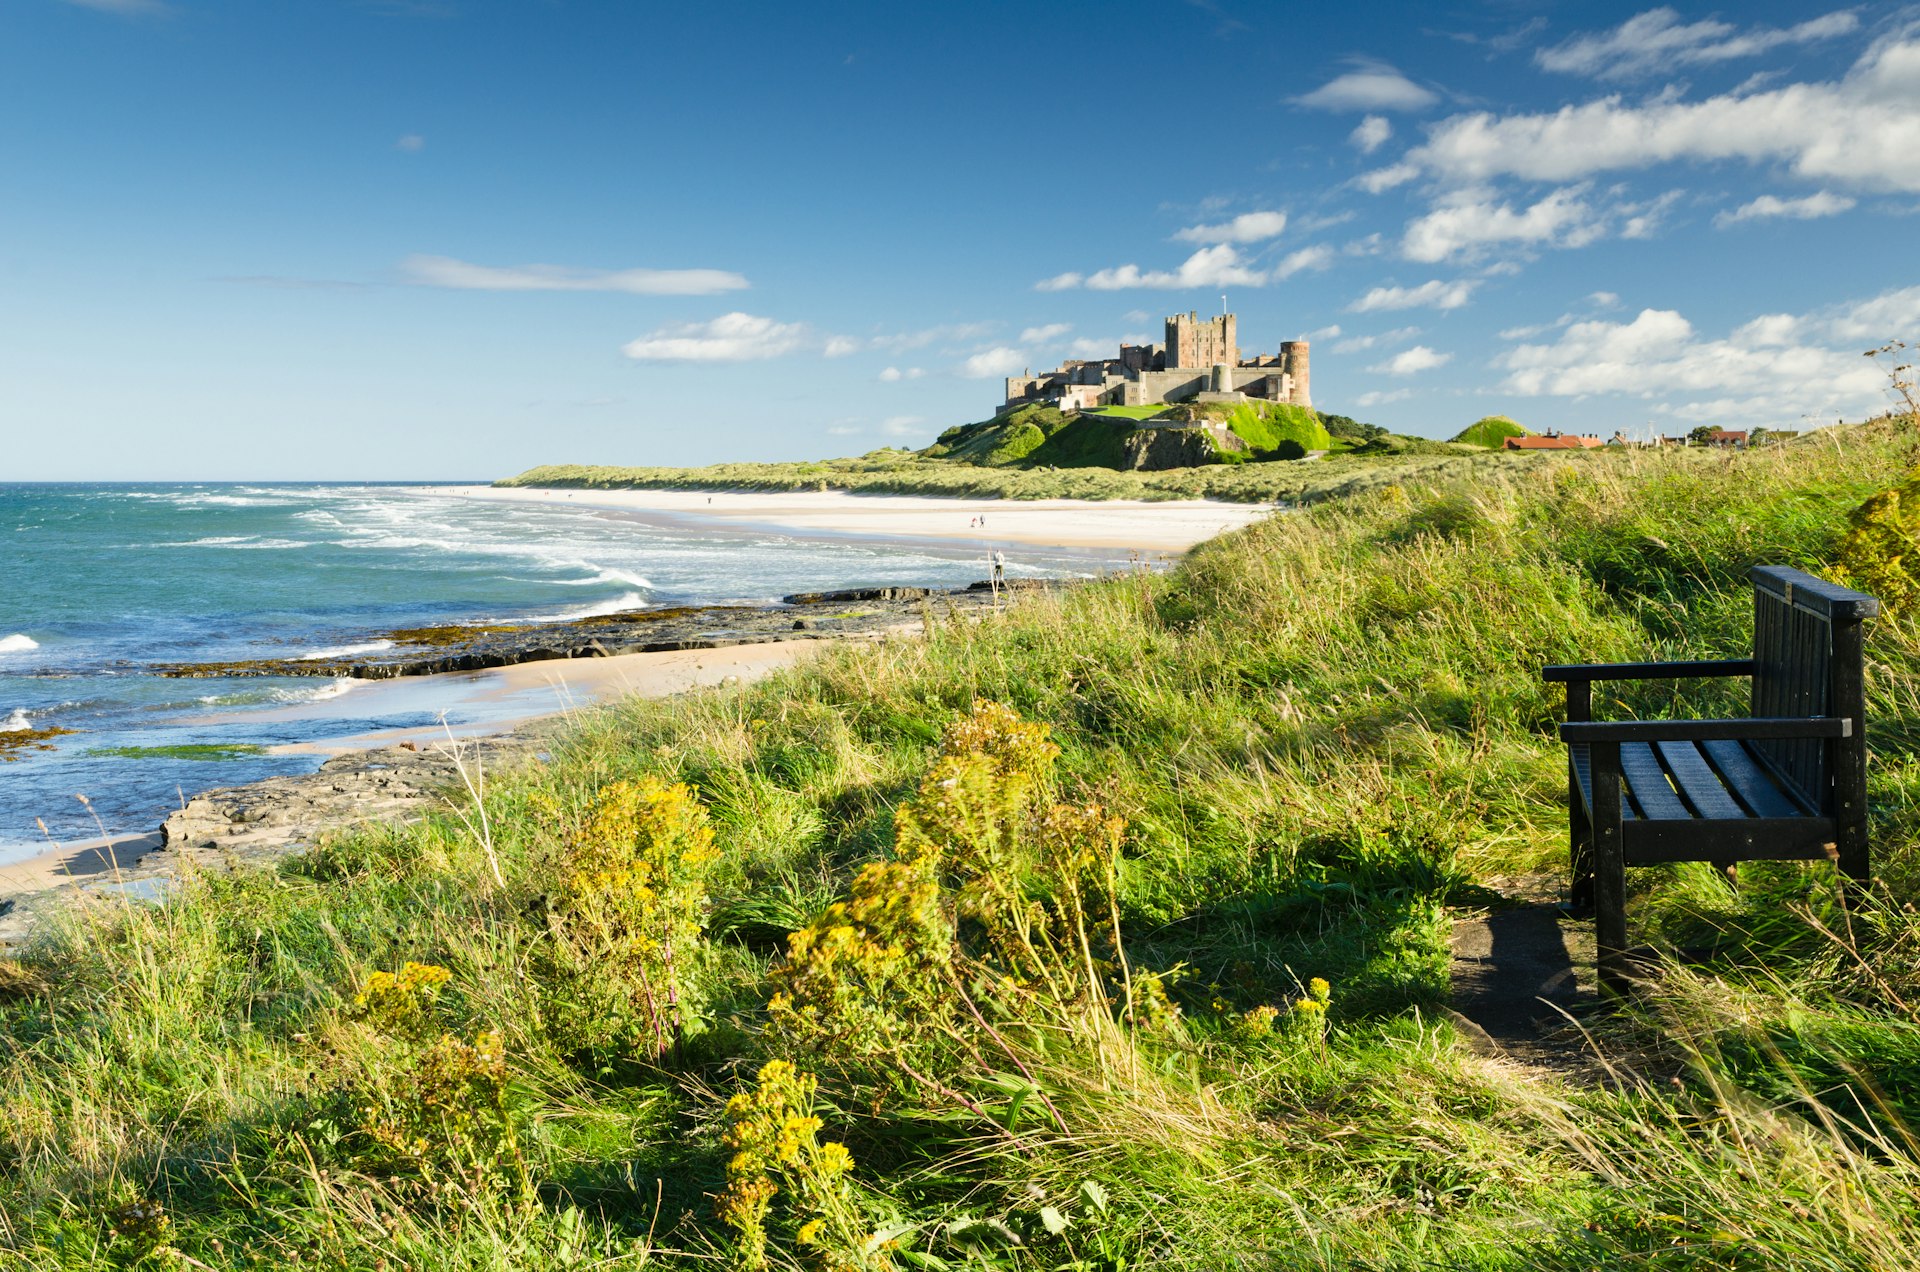 Bamburgh Castle and a rest seat overlooking the sea